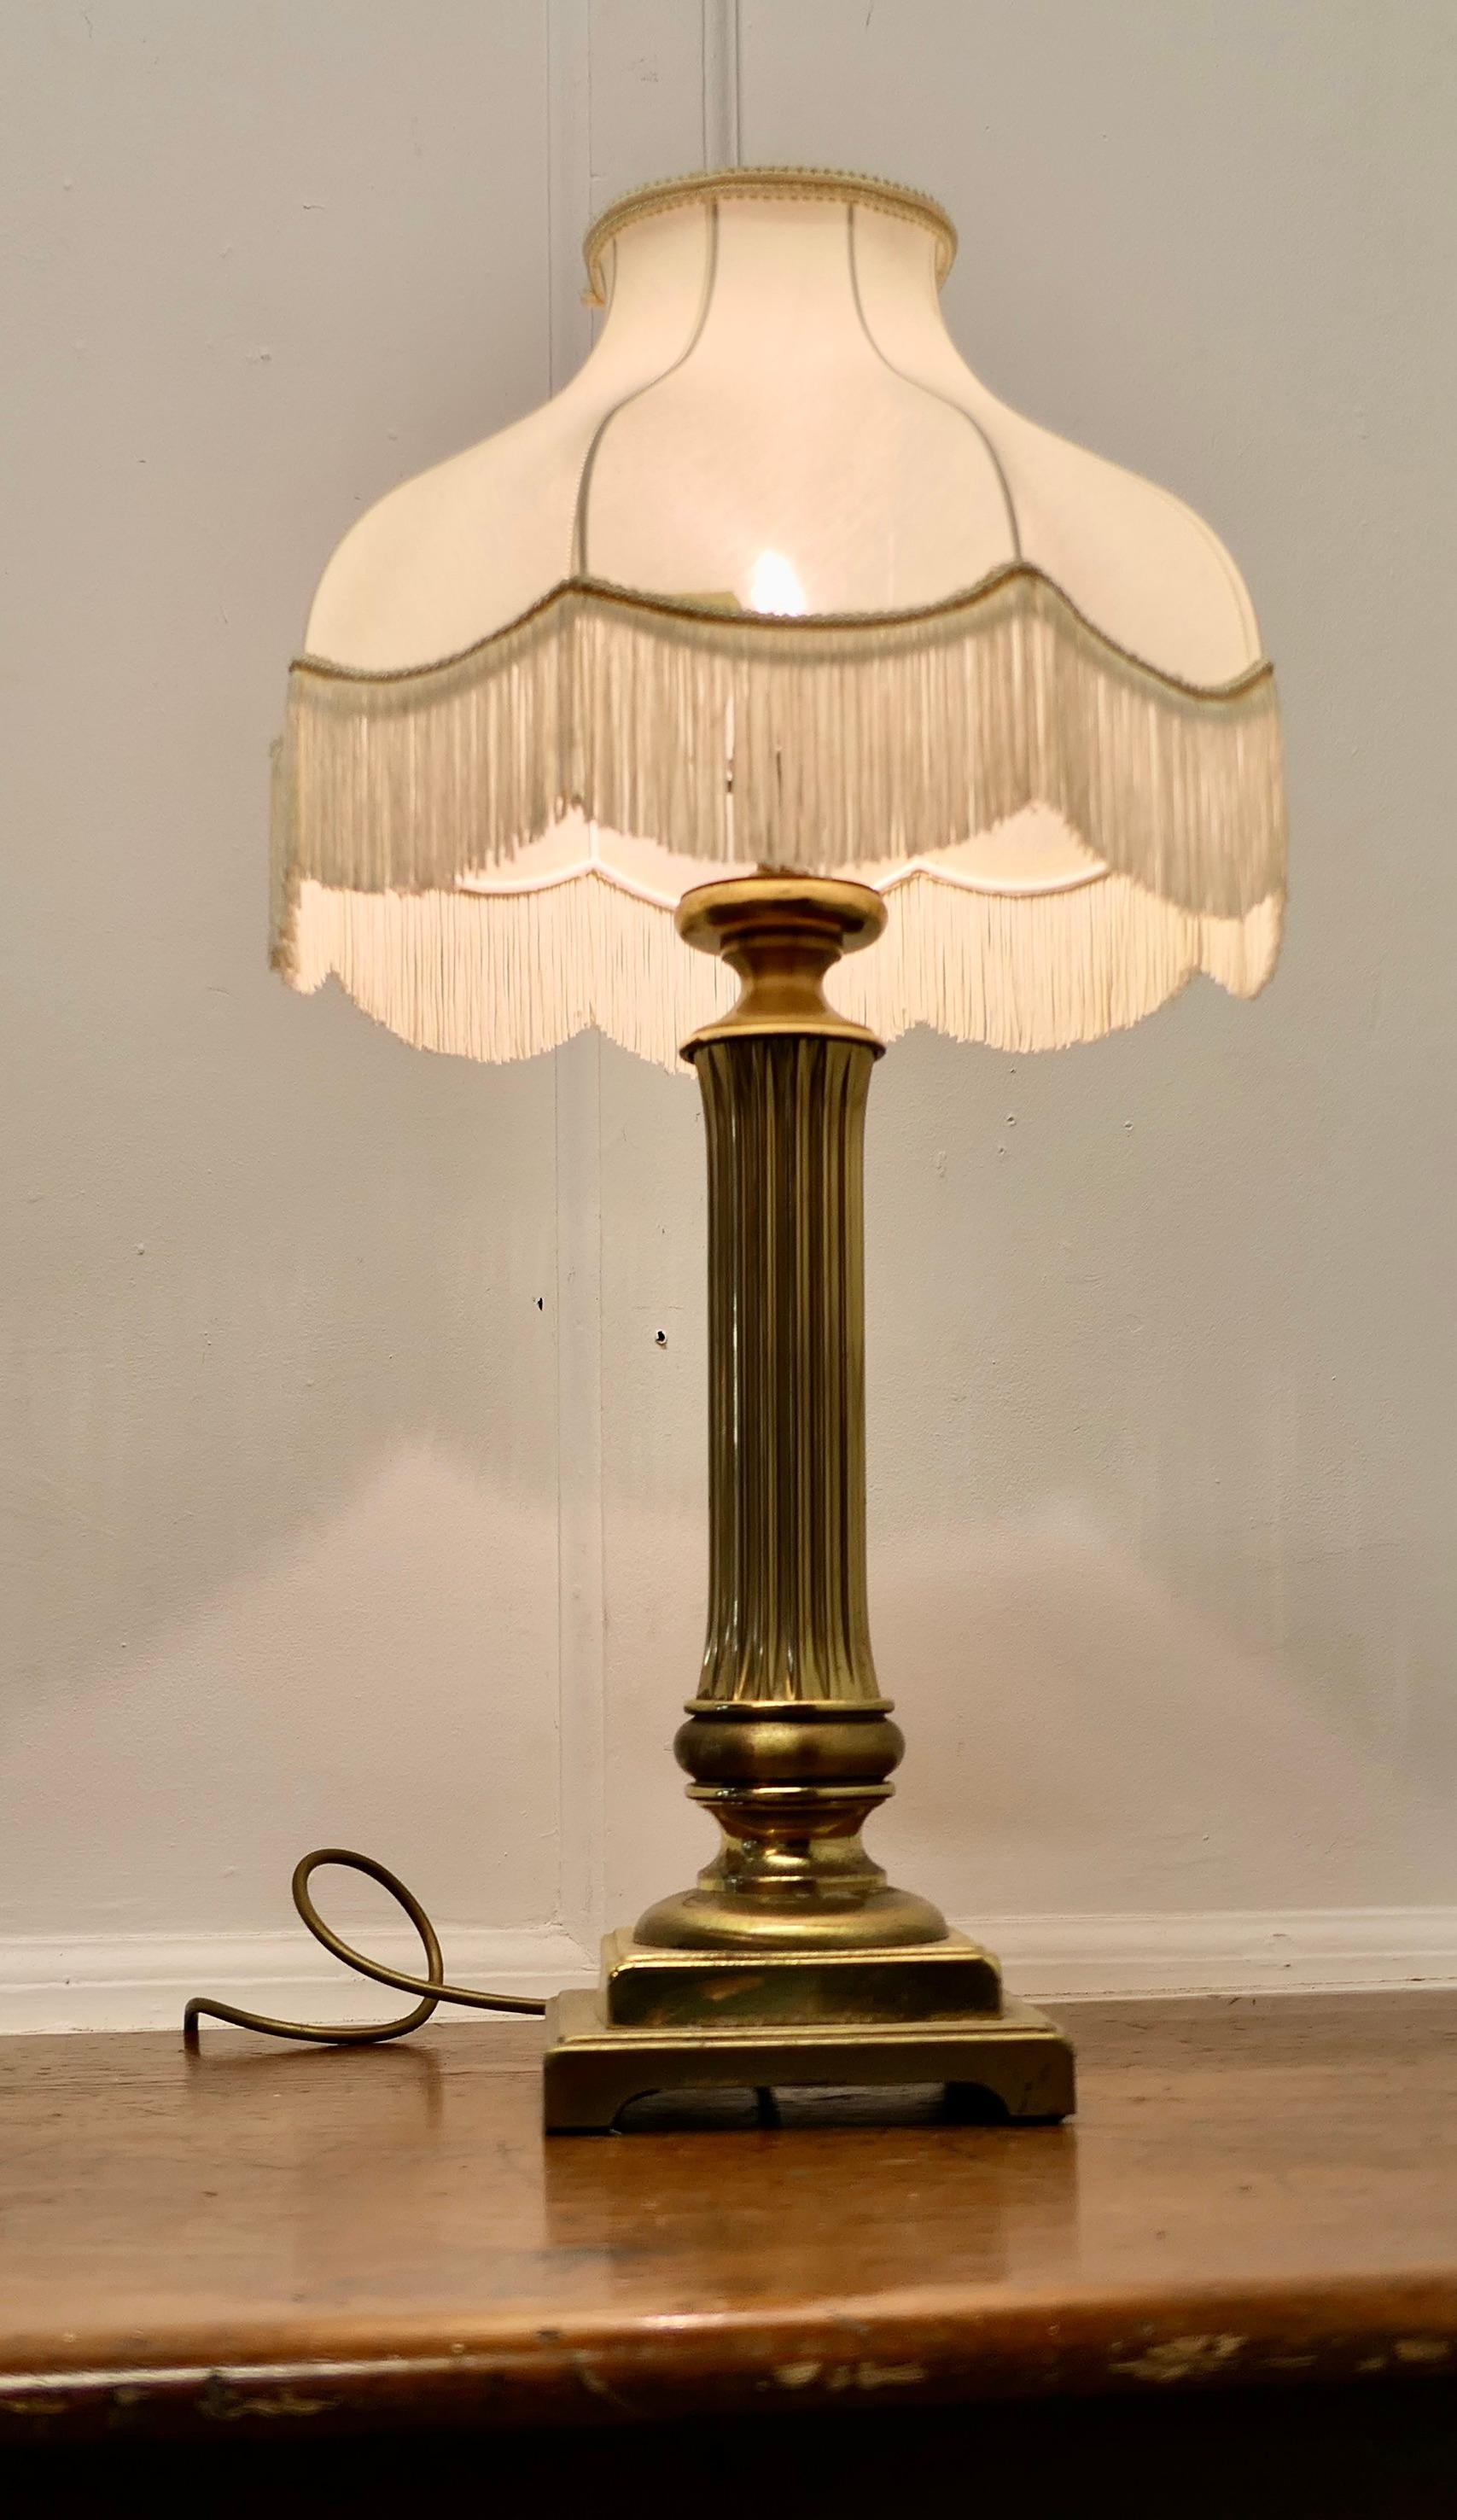 Chunky Brass Corinthian Column Table Lamp with Shade

This is a very attractive lamp it has a heavy single corinthian style column set on a stepped rectangular base, it comes with a neutral coloured linen lamp shade, this can be included if